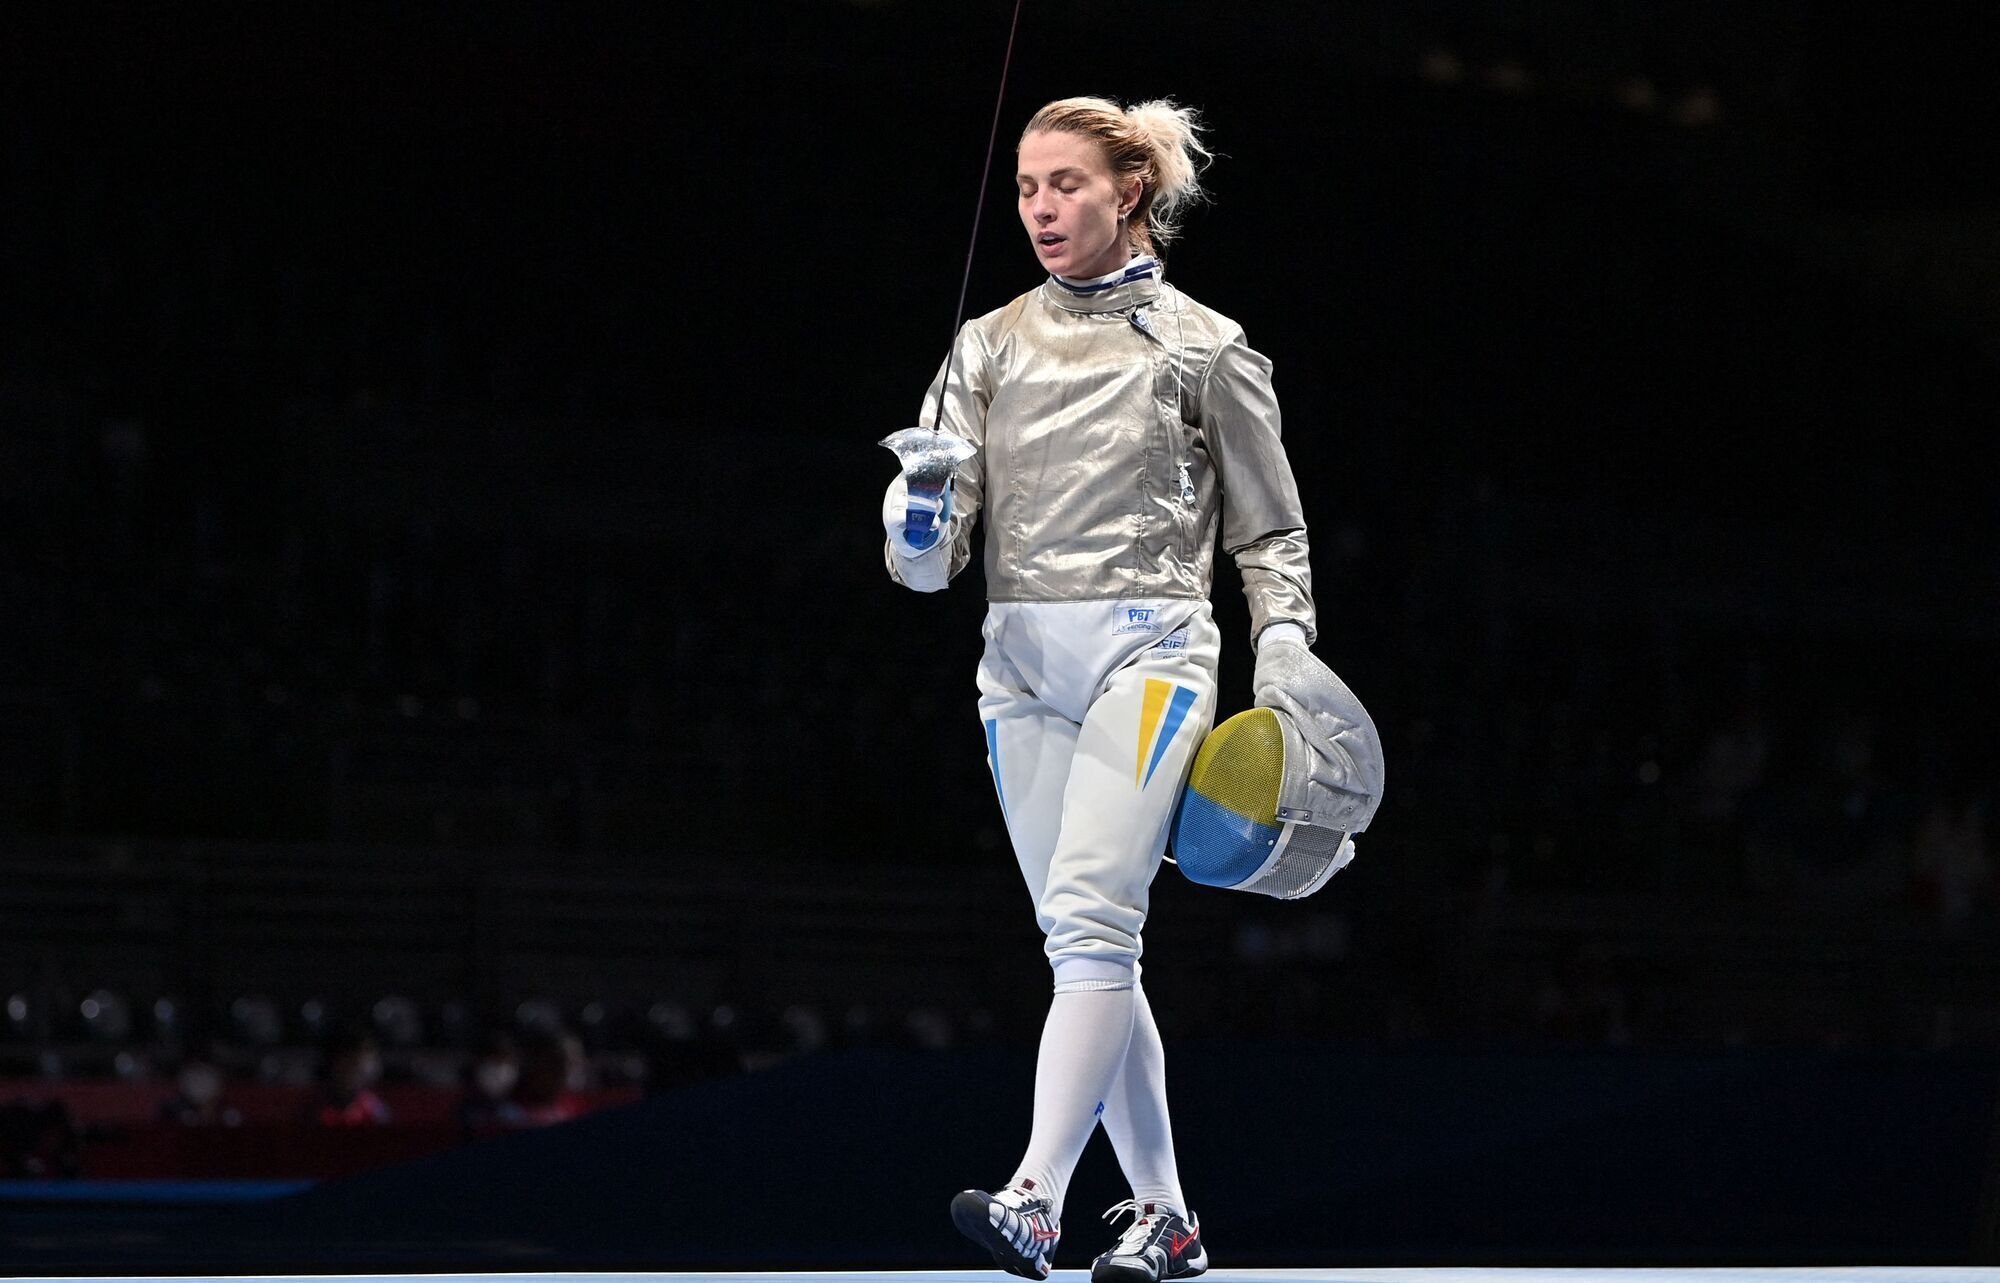 The International Federation changed the rules of fencing after Kharlan incident